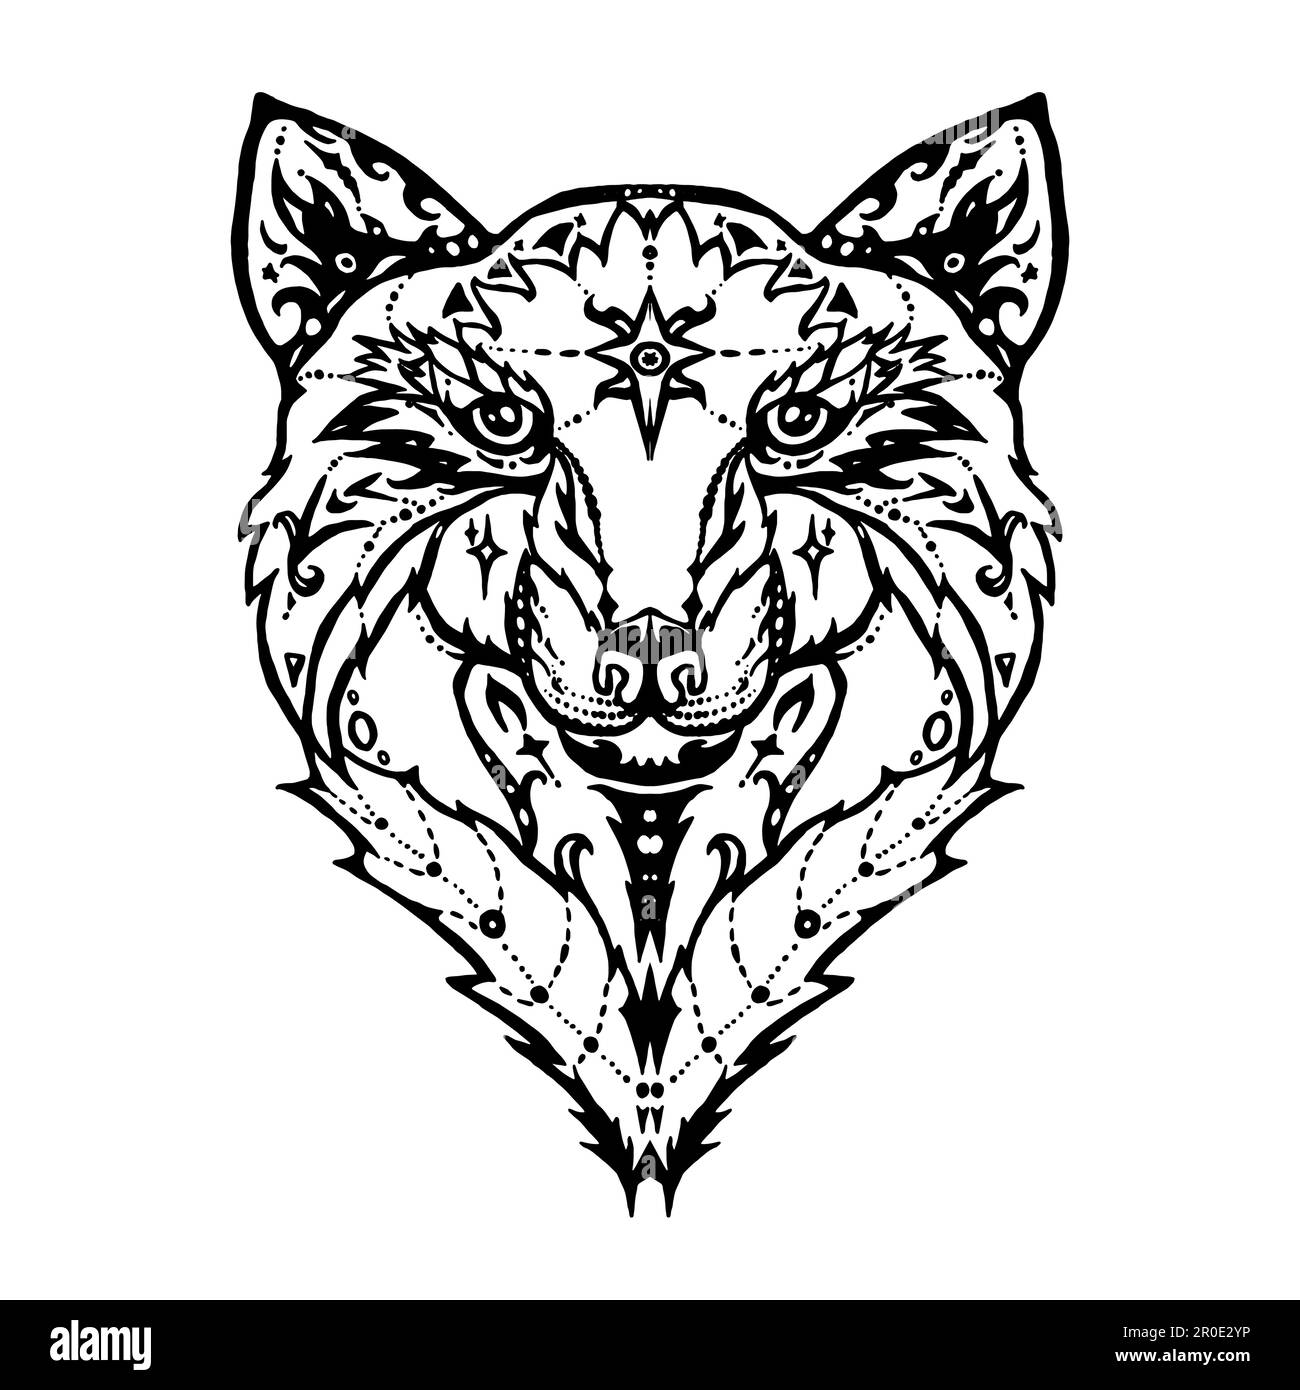 Download Aztec Animal Head Tattoo Designs  Aztec Tattoo Transparent PNG  Image with No Background  PNGkeycom